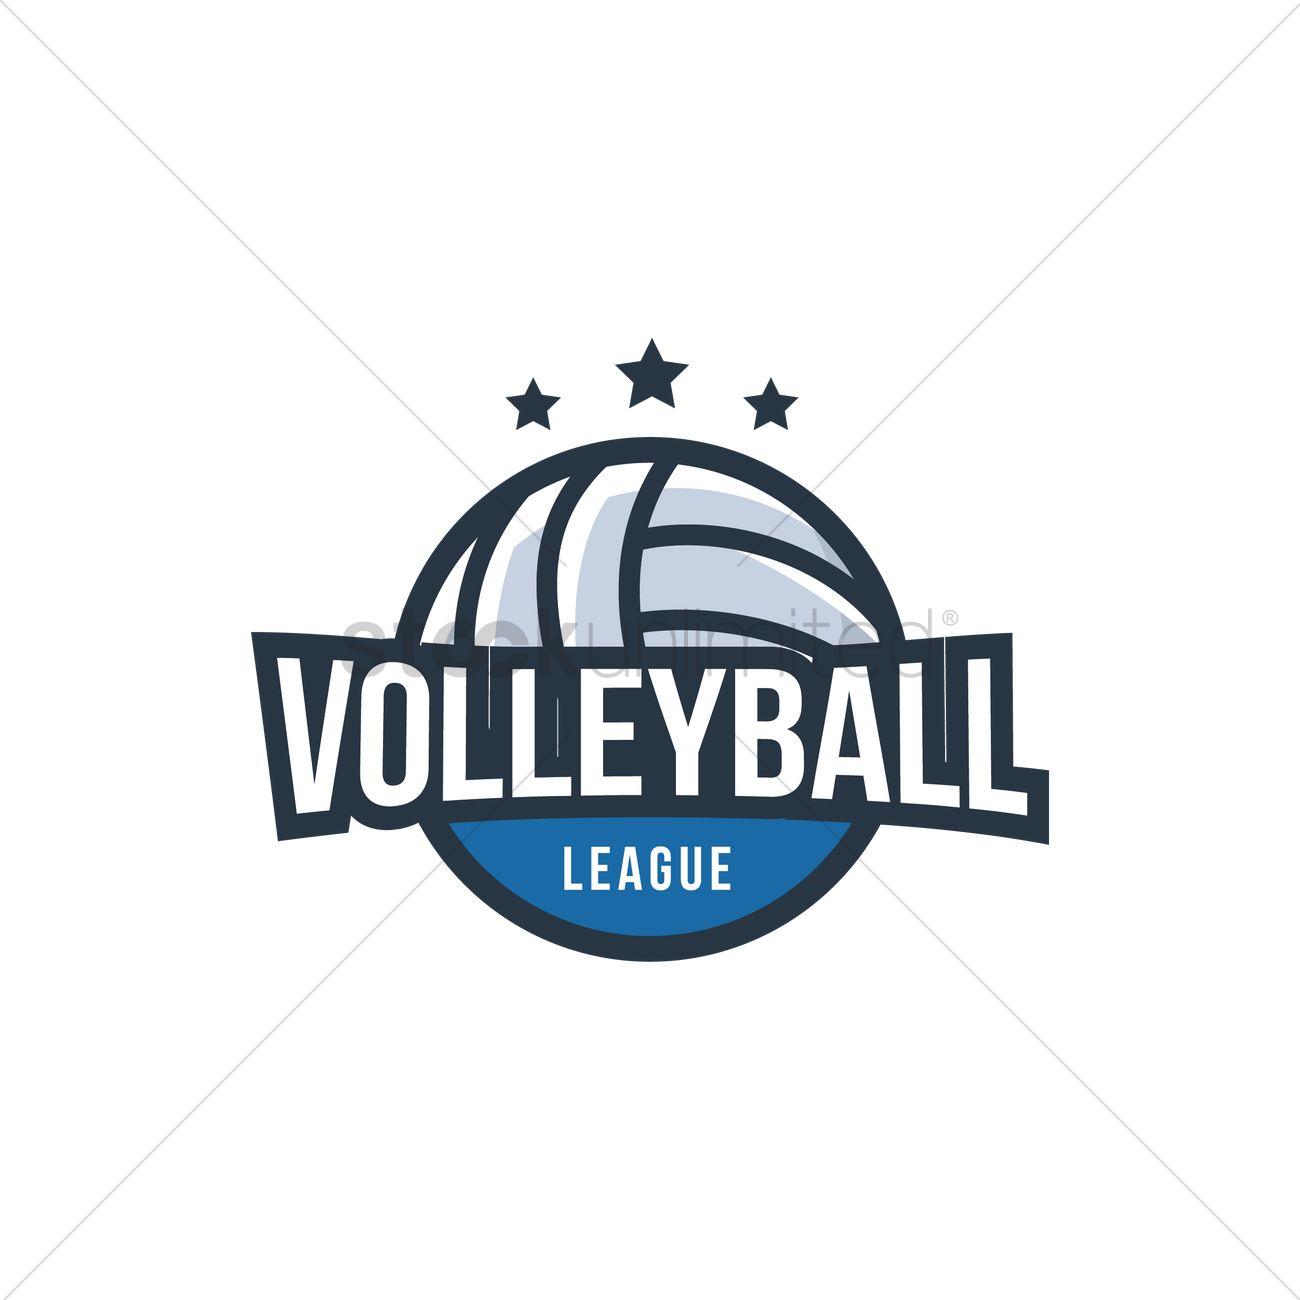 Volleyball Logo - Volleyball logo element design Vector Image - 2008762 | StockUnlimited